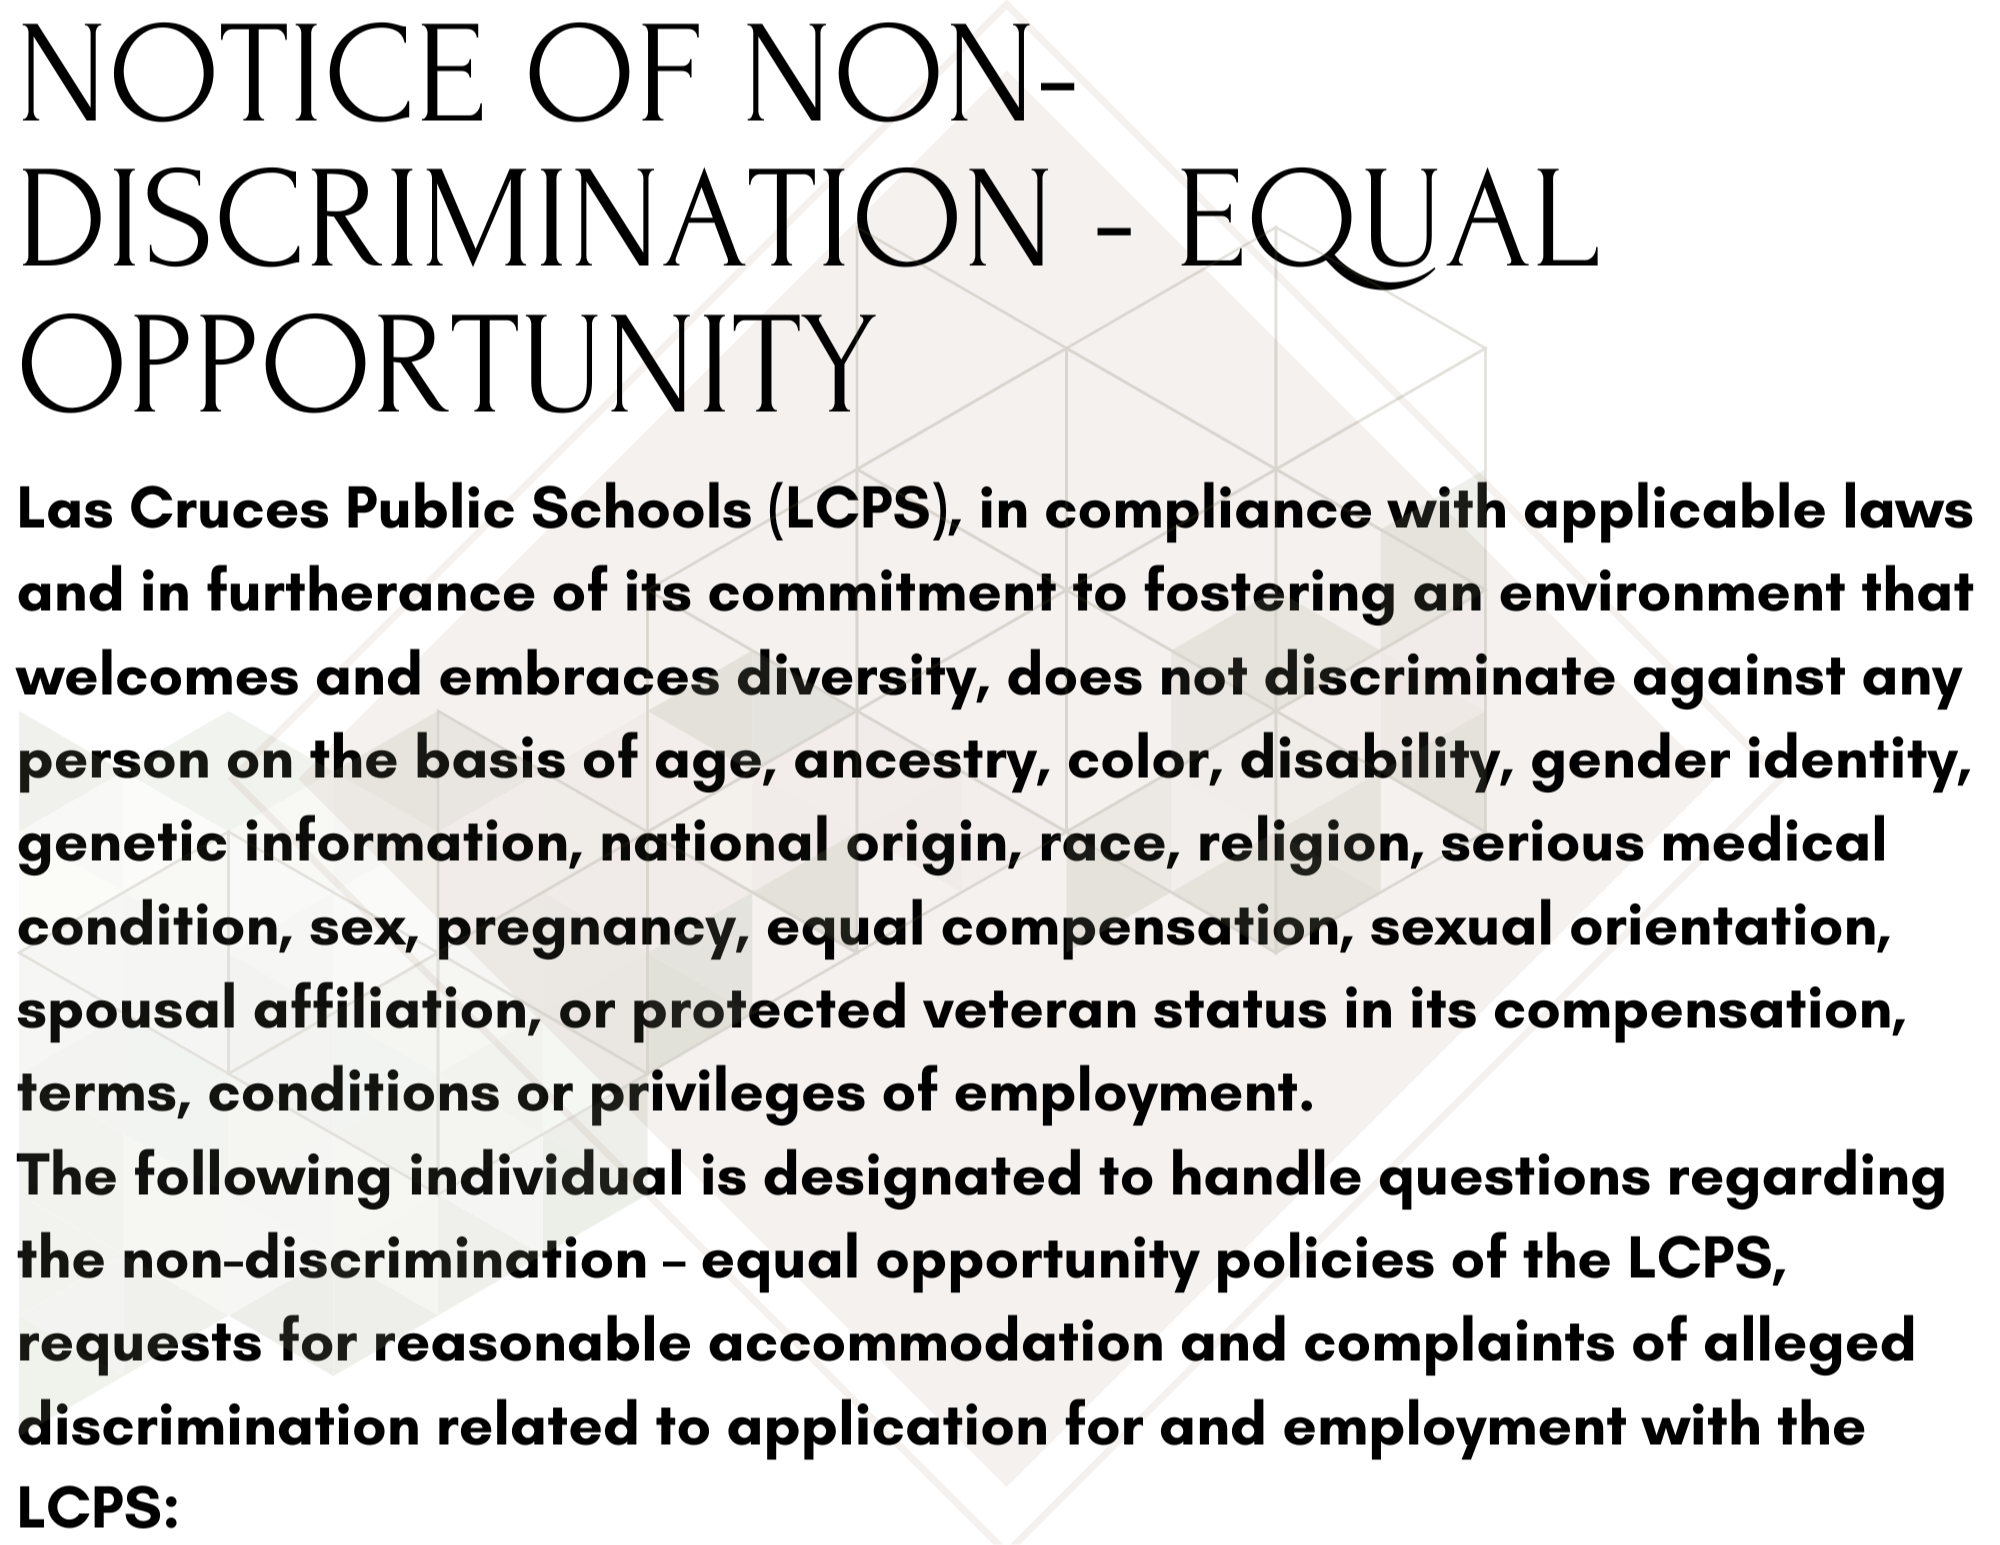 NOTICE OF NON-DISCRIMINATION - EQUAL OPPORTUNITY